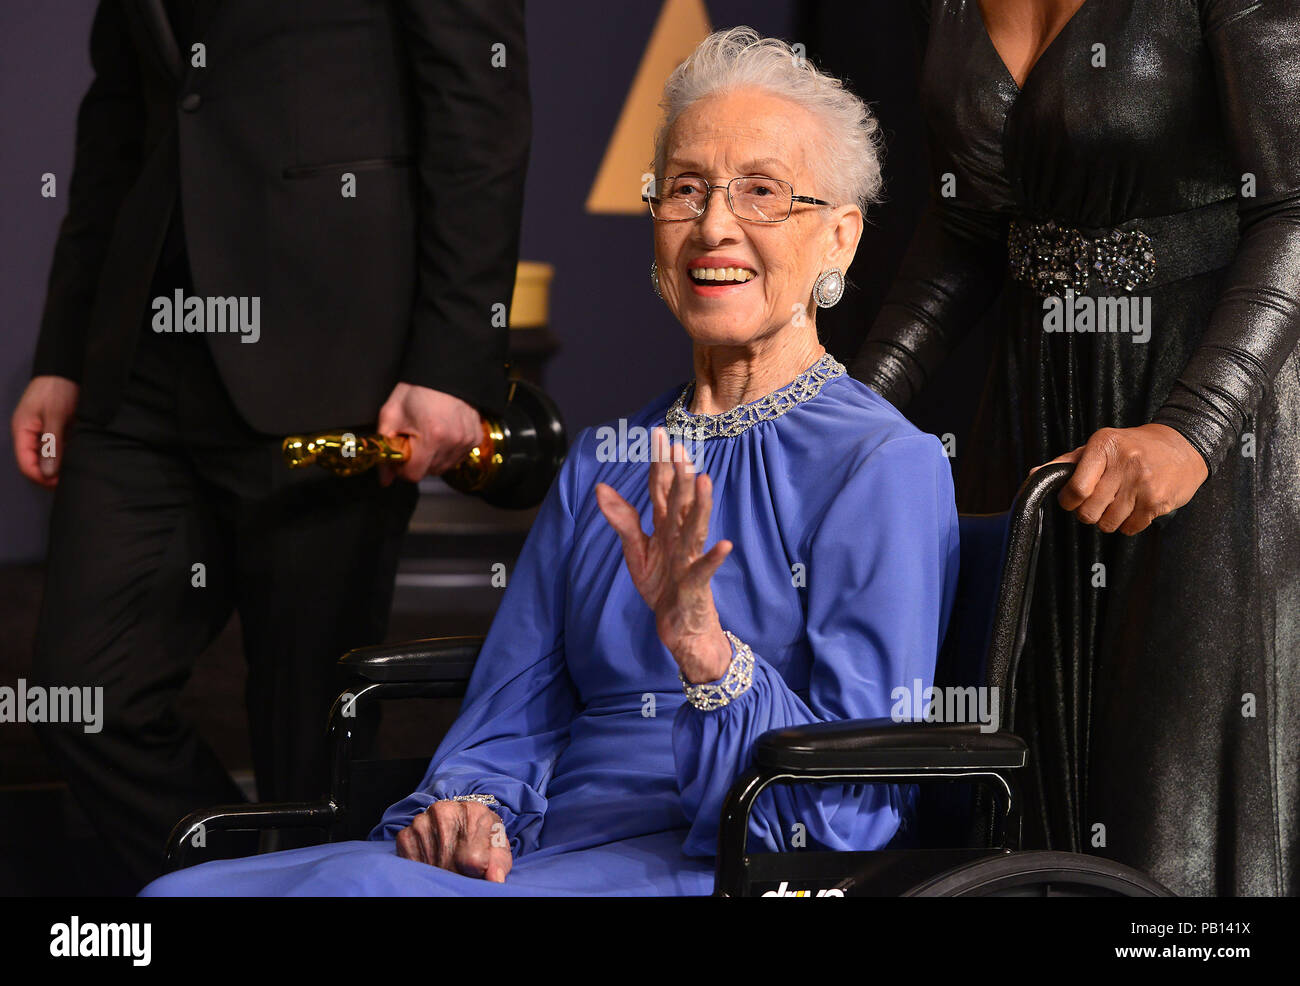 Katherine Johnson 449  89th Academy Awards ( Oscars ), press room at the Dolby Theatre in Los Angeles. February 26, 2017.Katherine Johnson 449  Event in Hollywood Life - California, Red Carpet Event, USA, Film Industry, Celebrities, Photography, Bestof, Arts Culture and Entertainment, Topix Celebrities fashion, Best of, Hollywood Life, Event in Hollywood Life - California,  show, movie celebrities, TV celebrities, Music celebrities, Topix, Bestof, Arts Culture and Entertainment, Photography,   backstage trophy 2017, Awards inquiry tsuni@Gamma-USA.com , Credit Tsuni / USA, Stock Photo